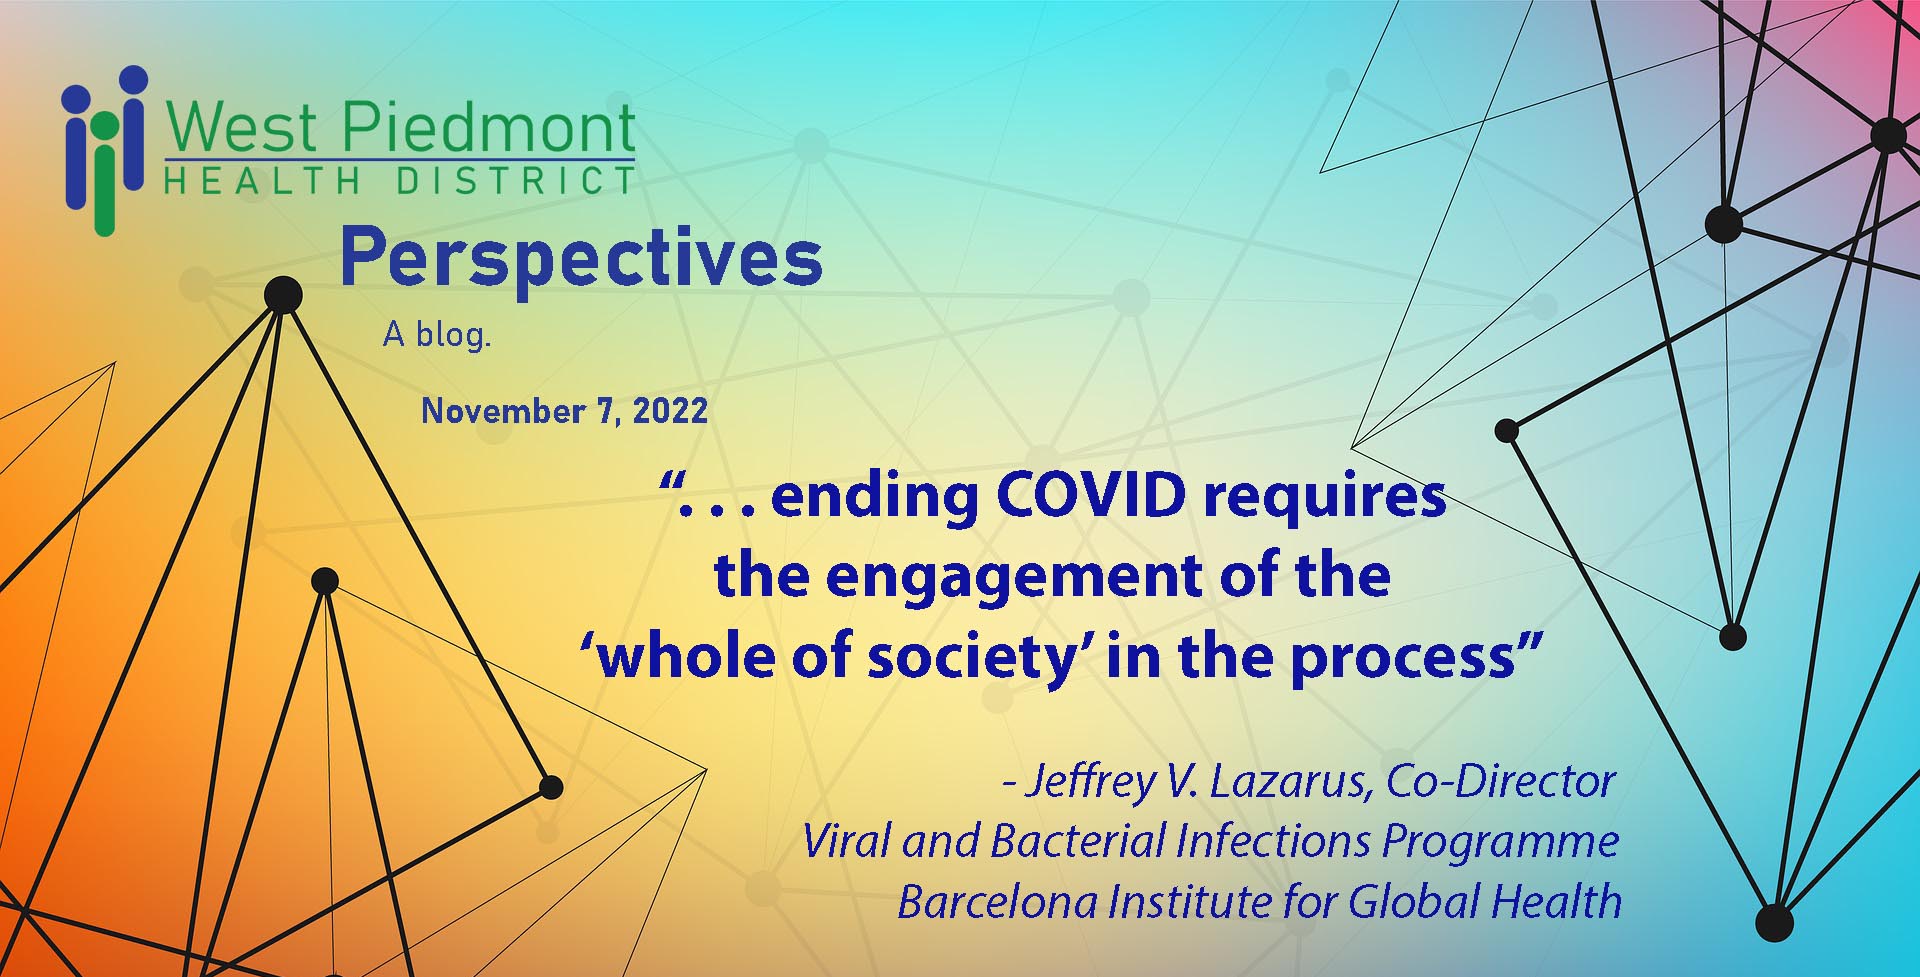 Perspectives cover quote: “. . . ending COVID requires the engagement of the ‘whole of society’ in the process” - Jeffrey V. Lazarus, Co-Director Viral and Bacterial Infections Programme Barcelona Institute for Global Health